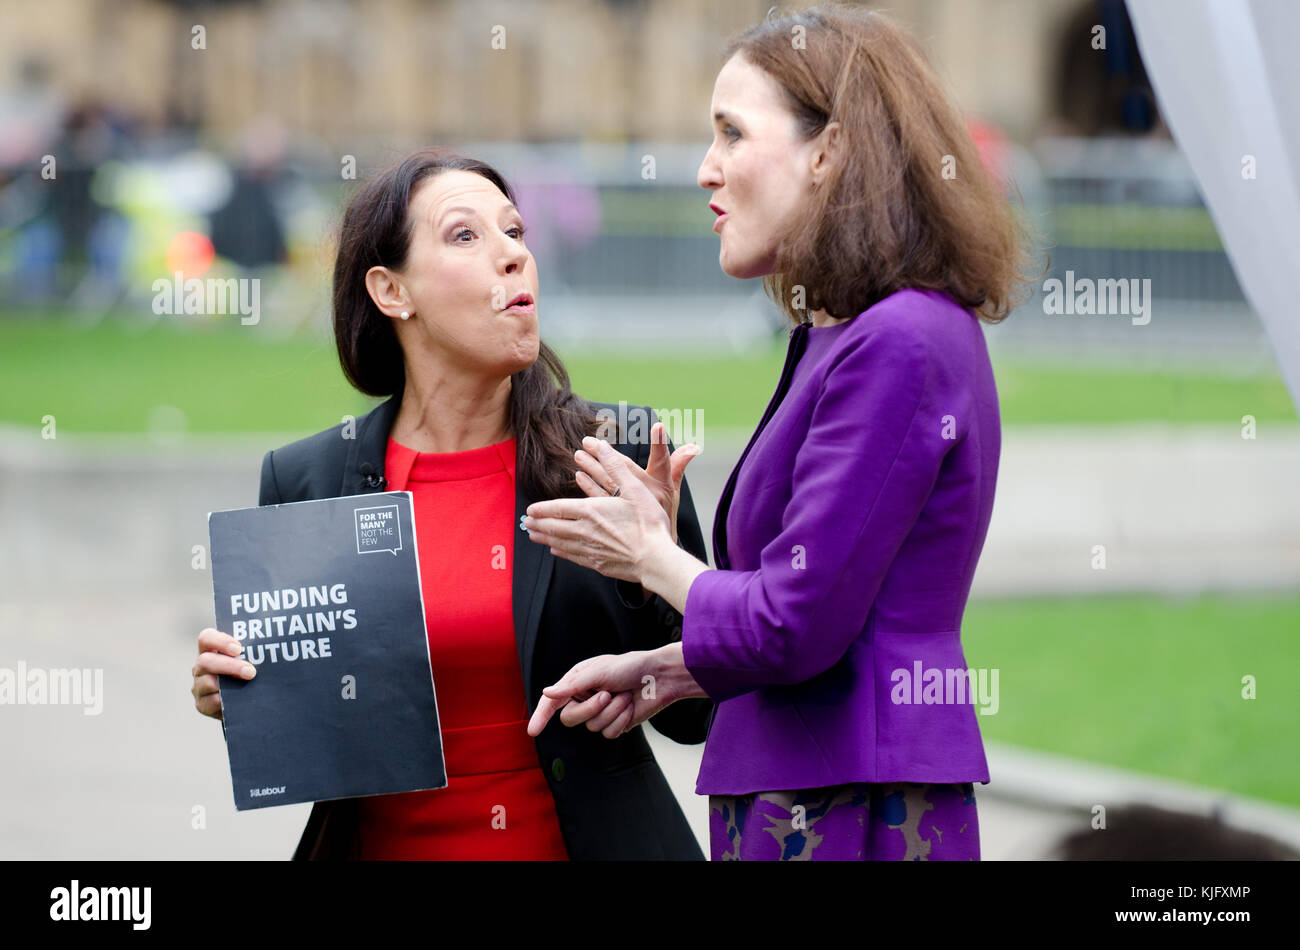 Debbie Abrahams MP (Labour; Oldham East and Saddleworth) and Theresa Villiers MP (Con: Chipping Barnet) on College Green, Westminster arguing about.. Stock Photo